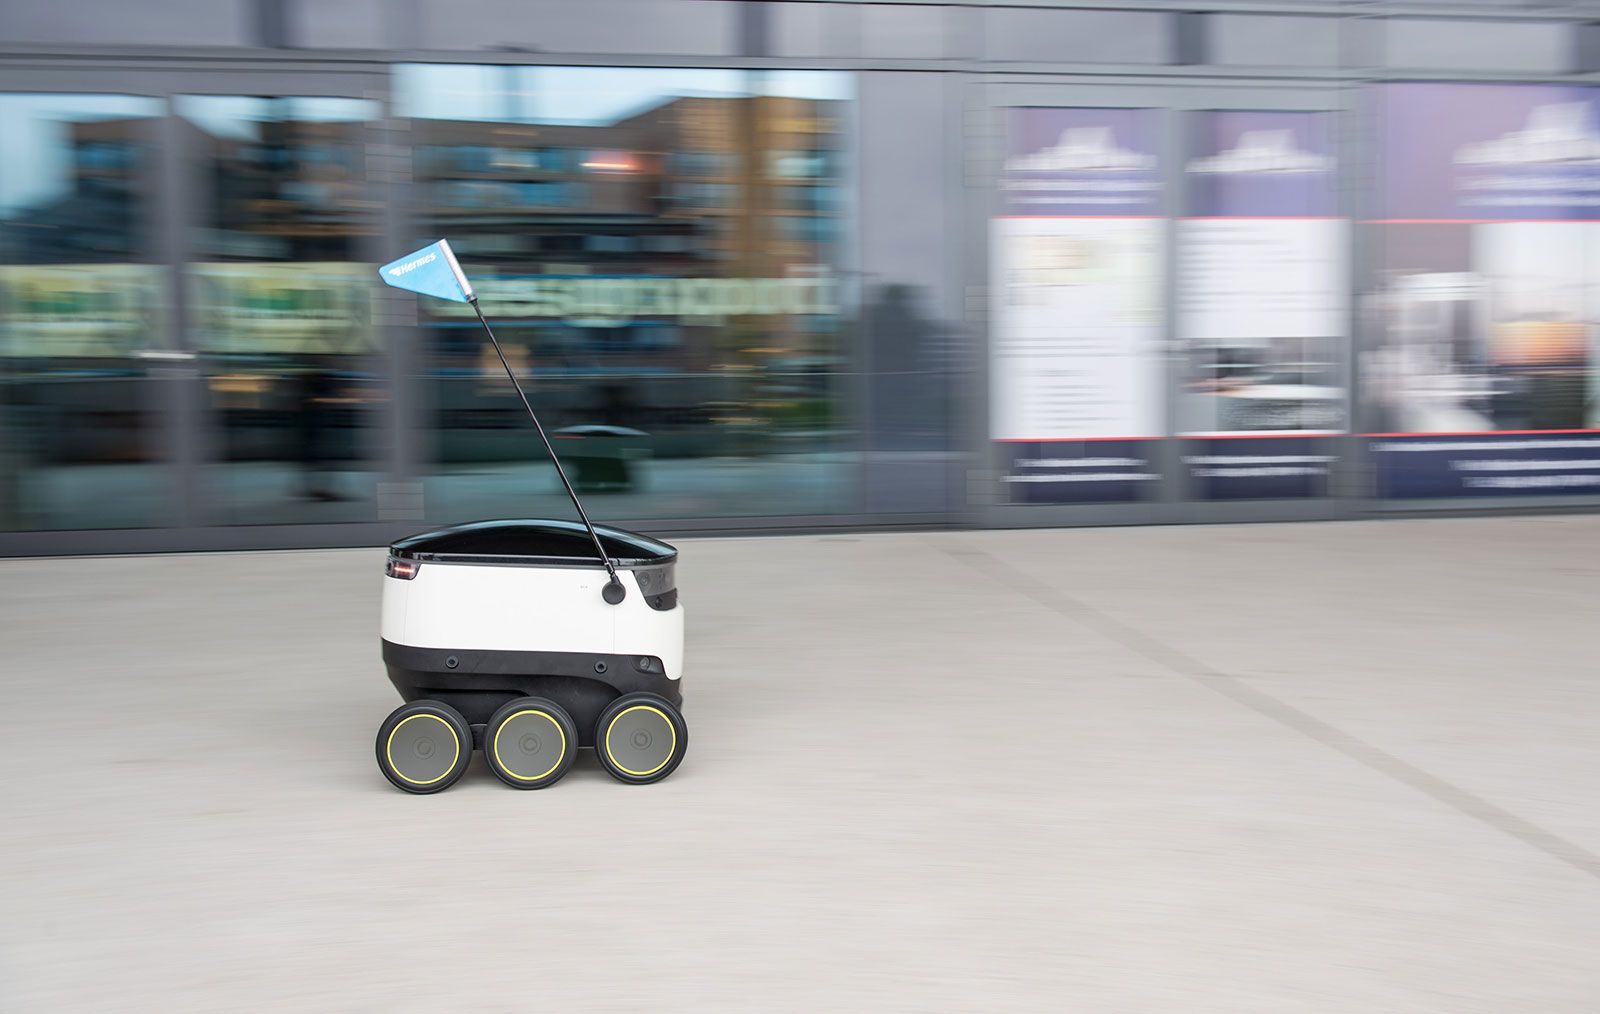 your hermes packages may soon arrive by robot instead of human courier image 1